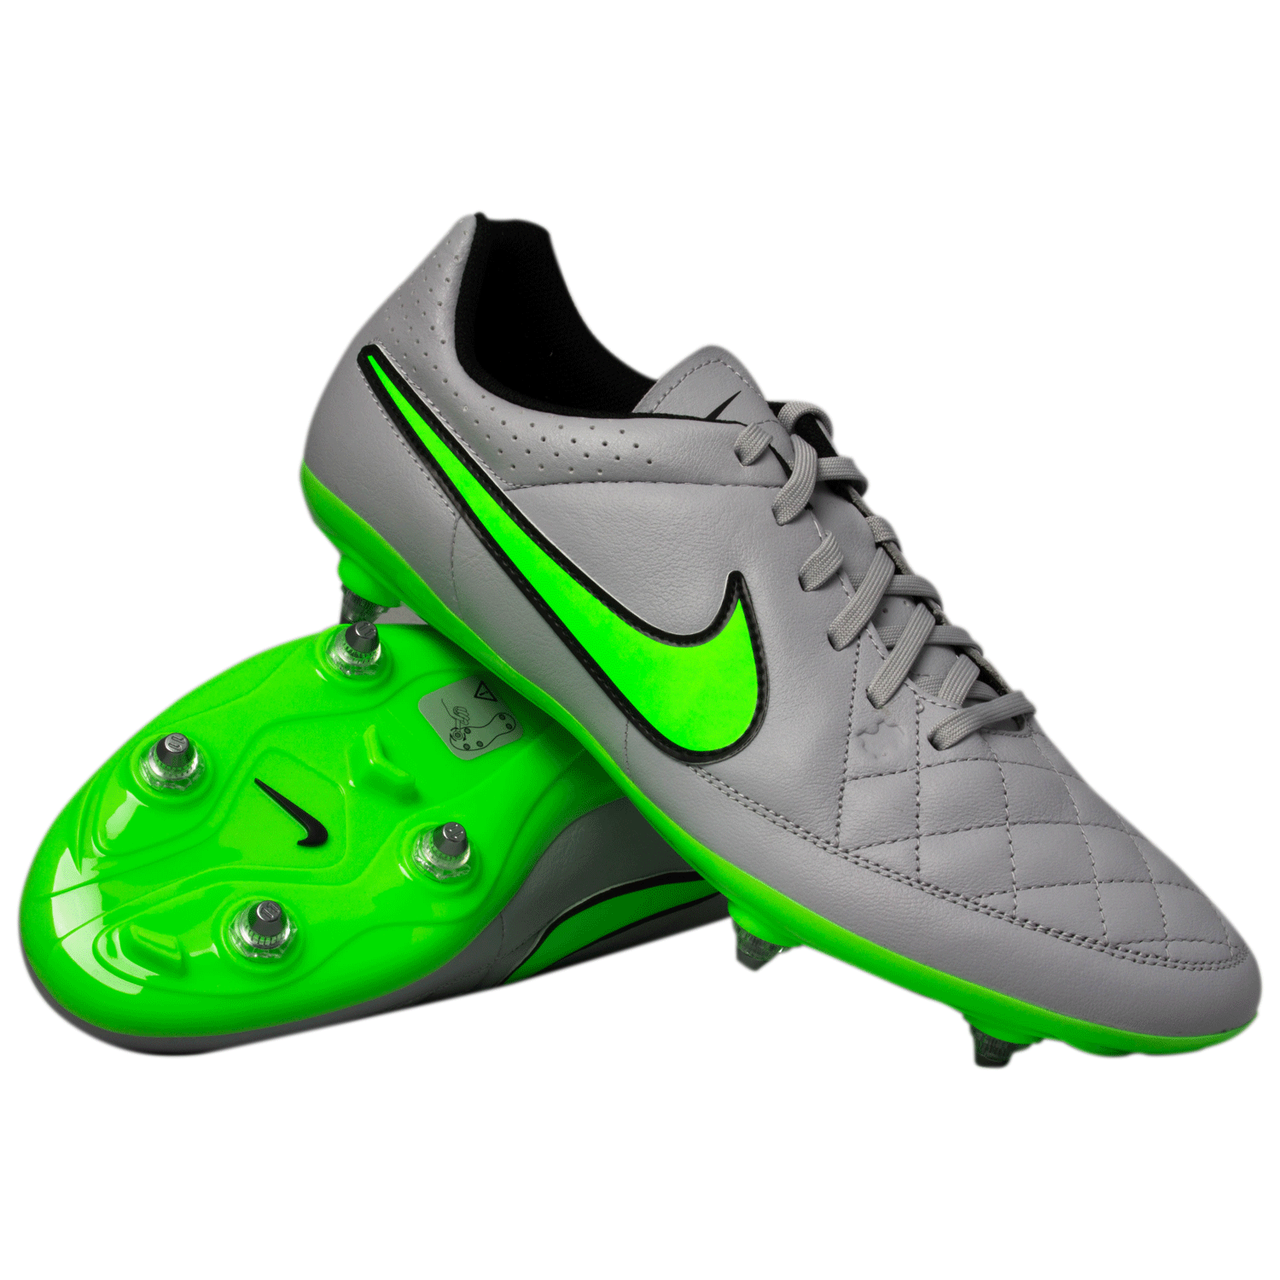 Nike Tiempo Genio Leather SG - WolfGrey/Green on sale at Rugby City | 109.99